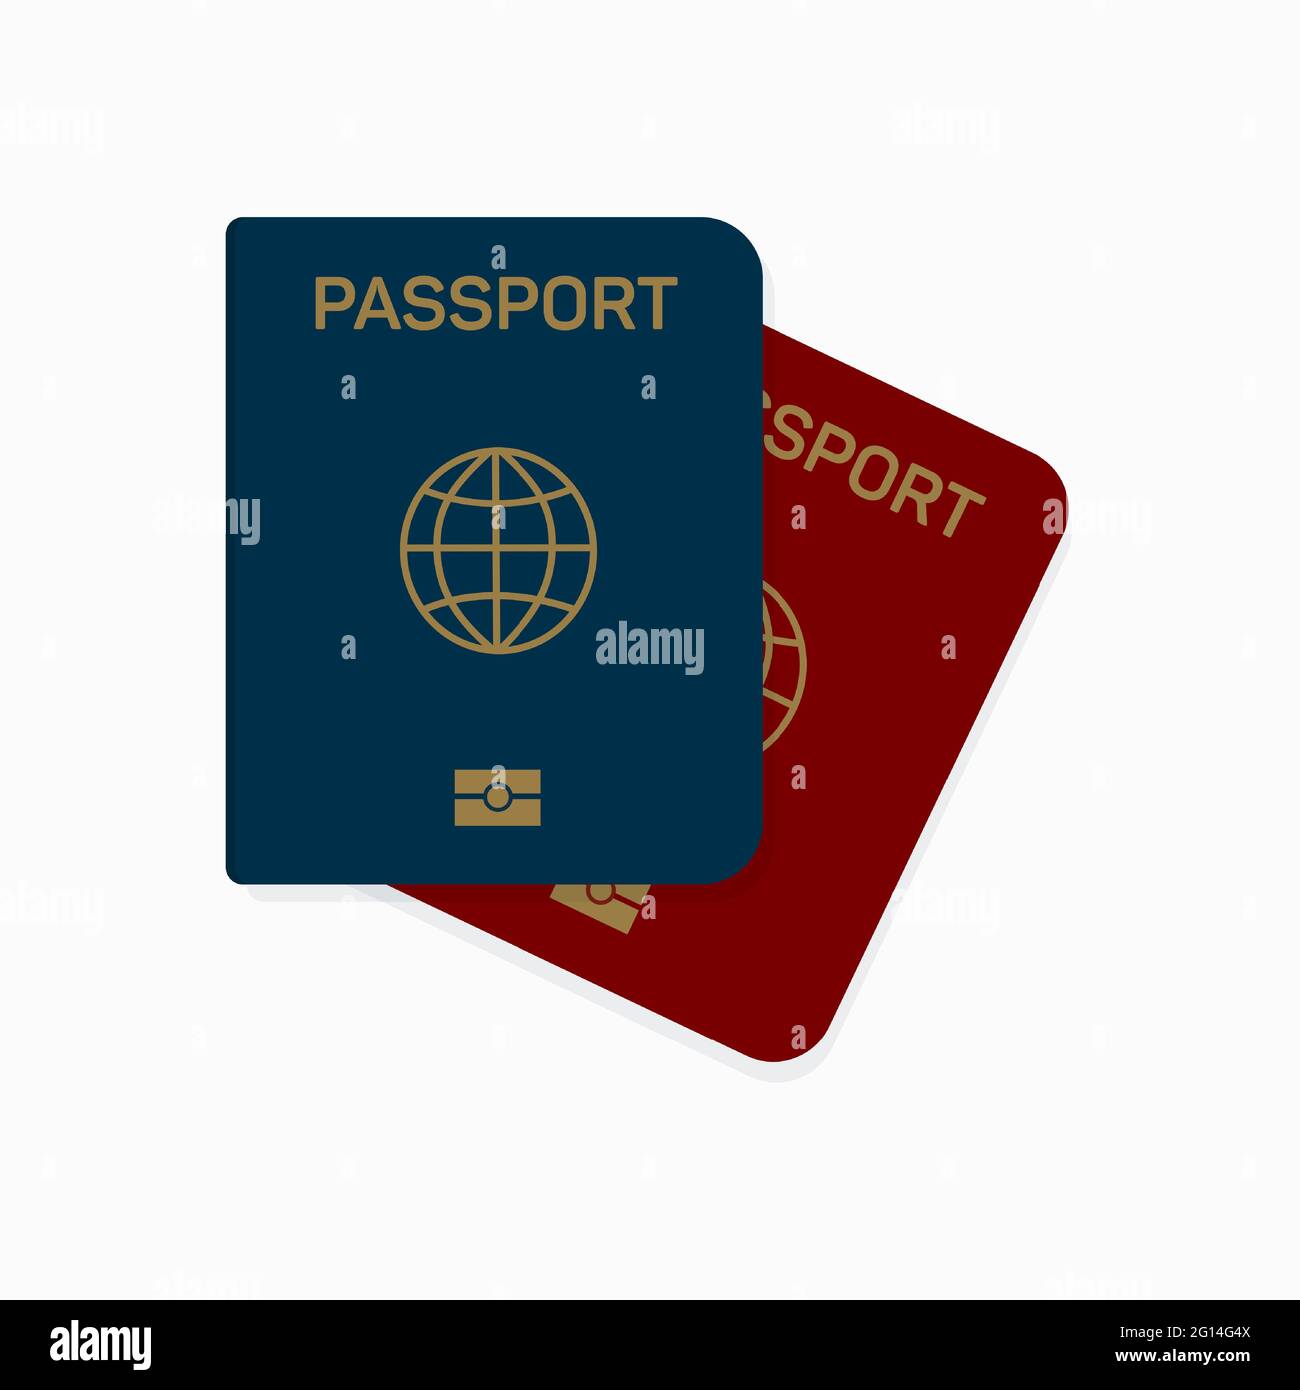 International biometric passport cover page. Blue and red top page